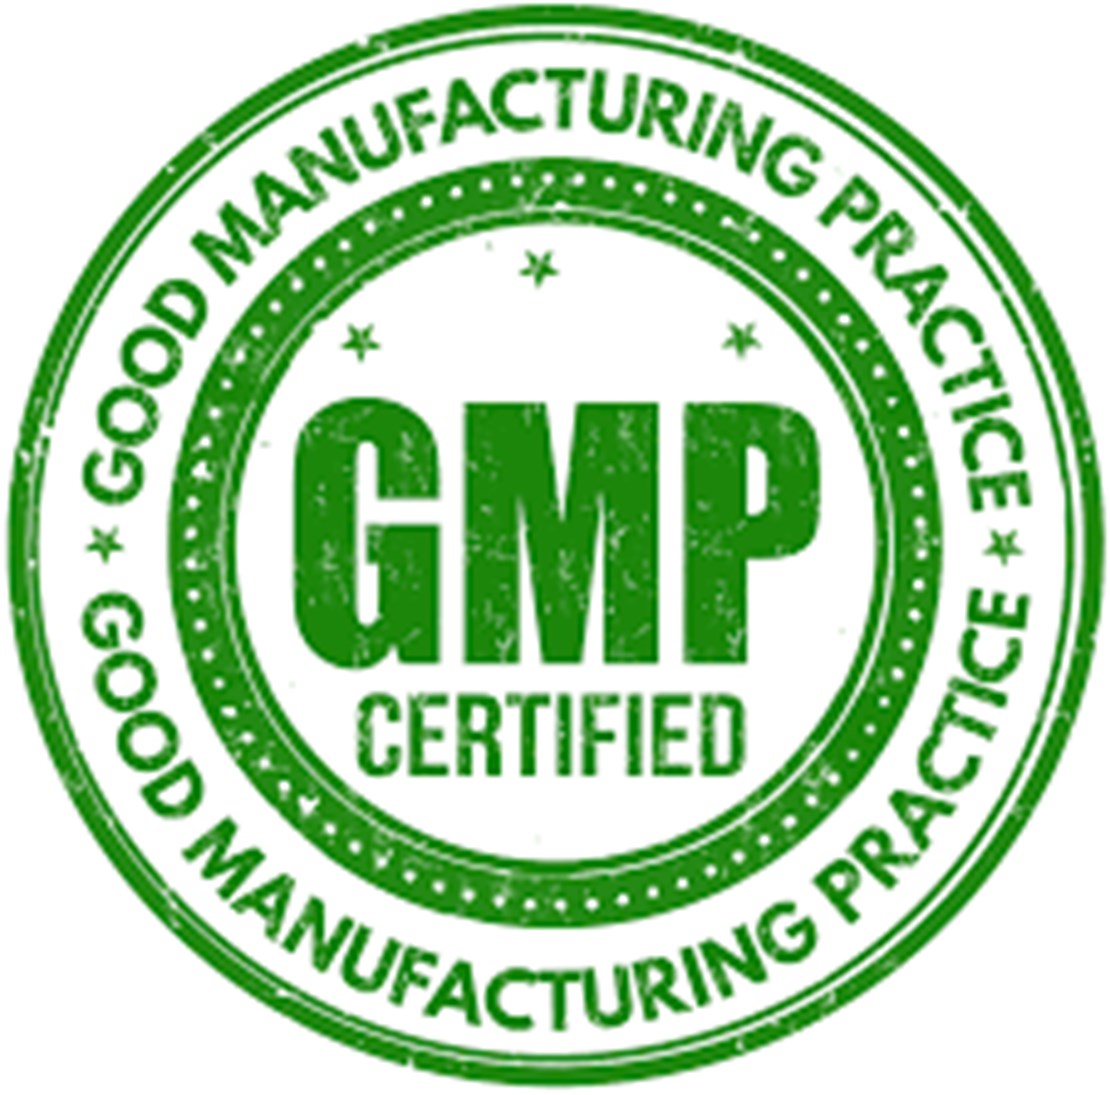  Good Manufacturing Practices (GMP)